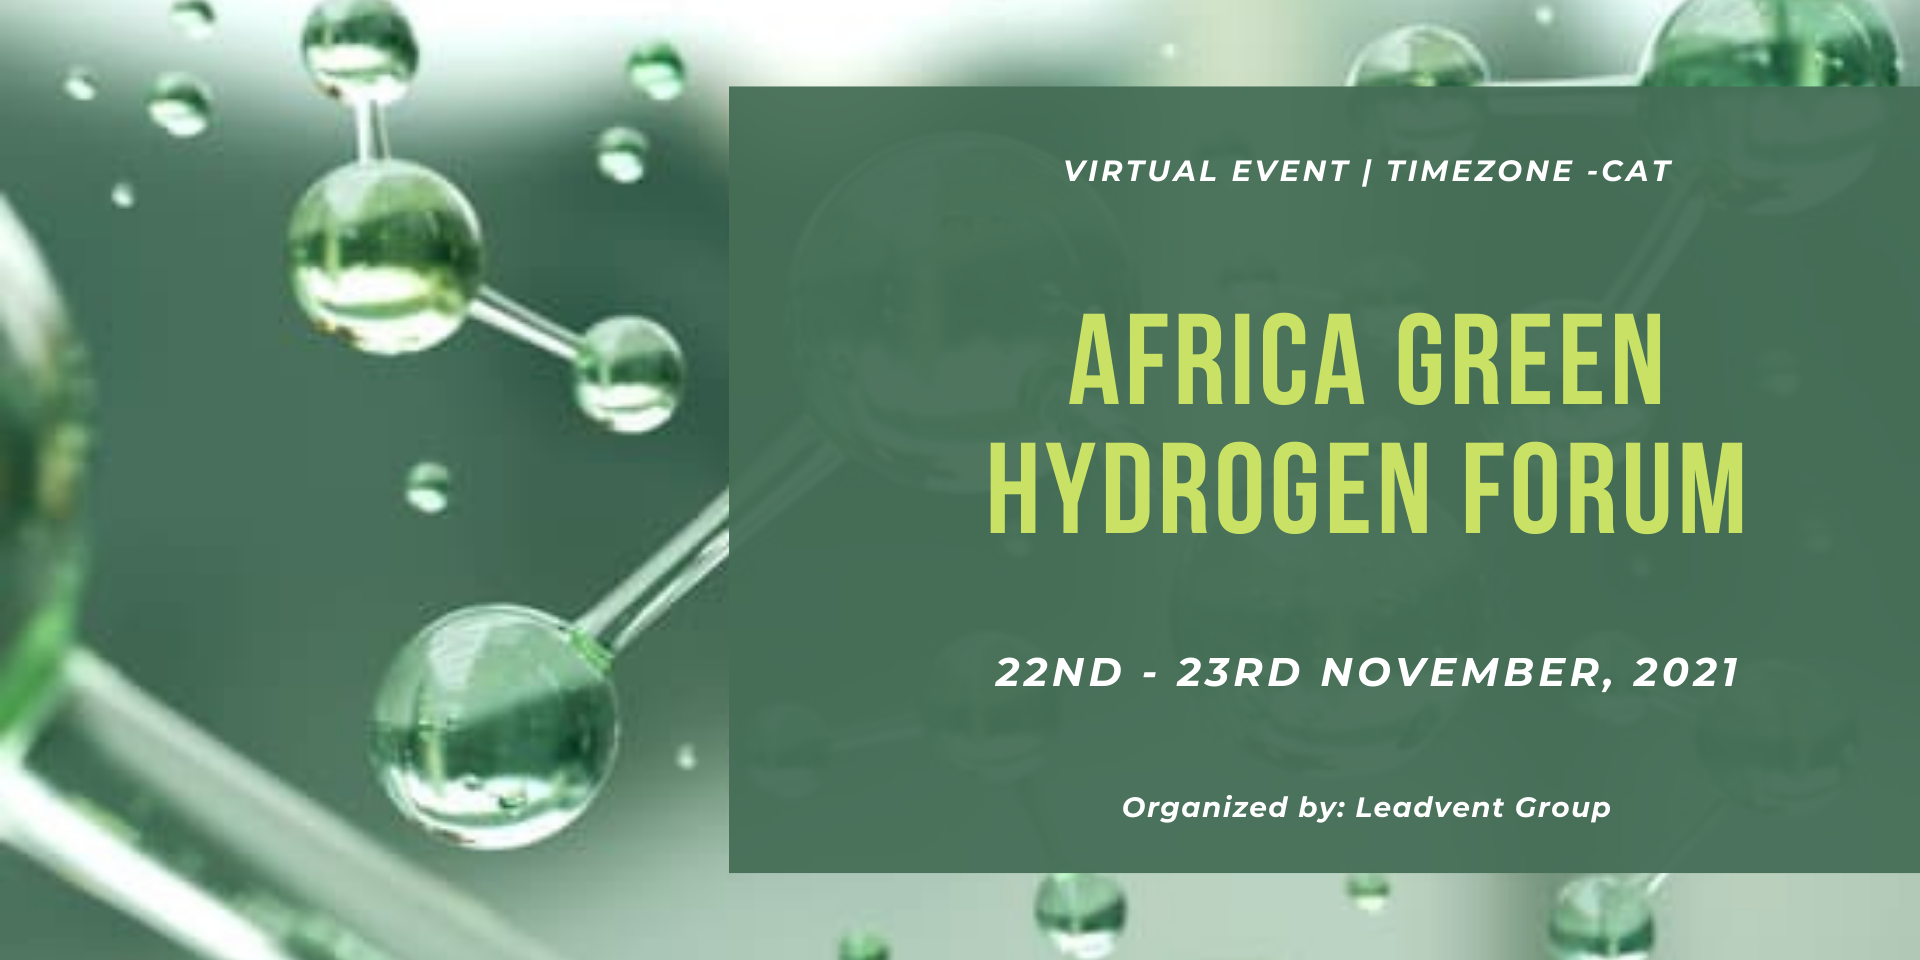 Madadh Maclaine will be speaking at “Africa Green Hydrogen”